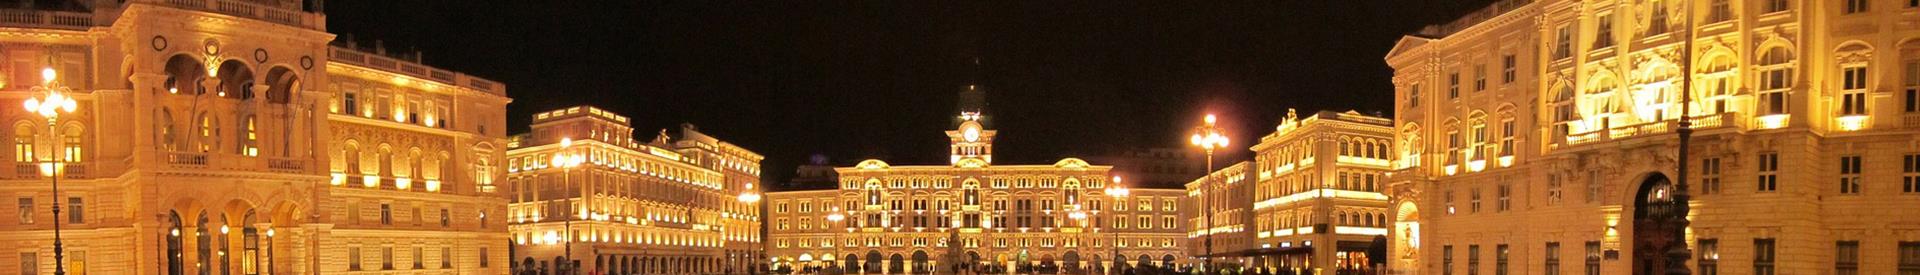  Looking for a hotel for your stay in Trieste (TS)? Book/reserve at the Hotel San Giusto